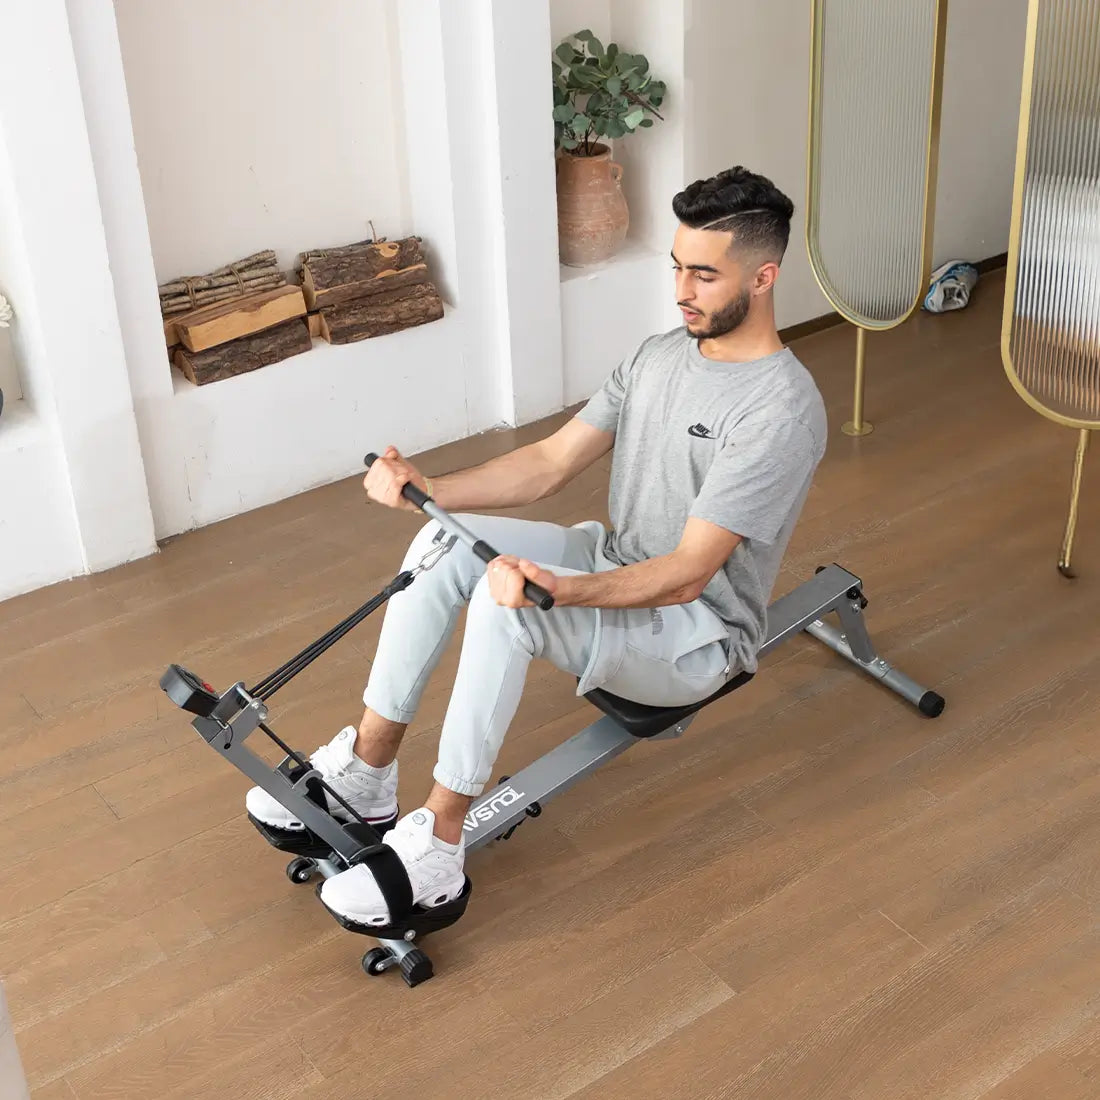 Tousains foldable rowing machine for home workout